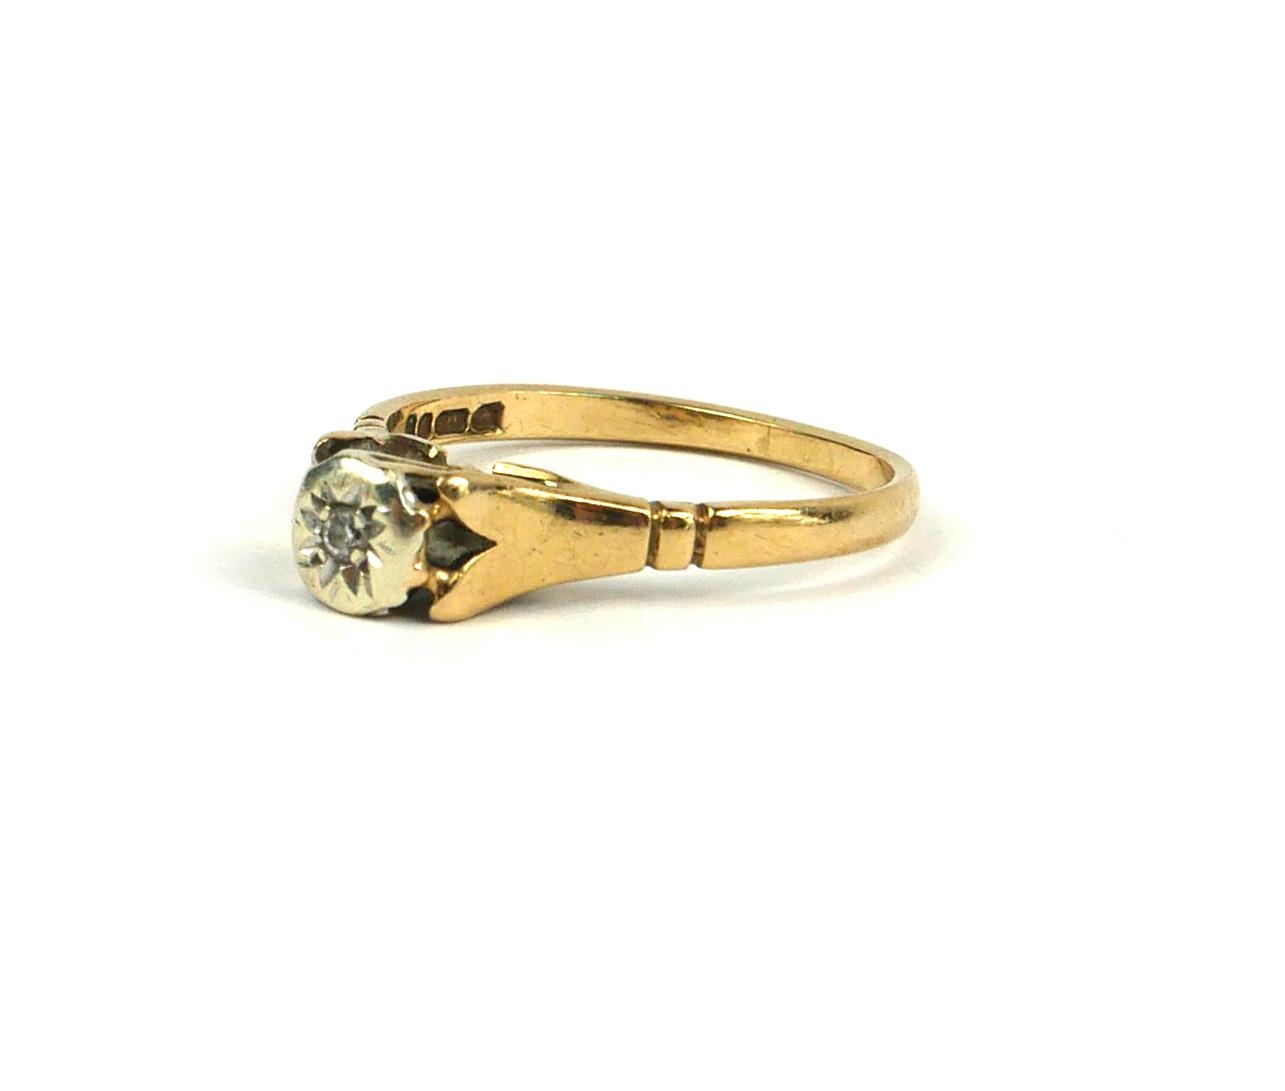 A 9CT GOLD AND DIAMOND GYPSY SET RING. (UK size N, 2.1g) - Image 3 of 3